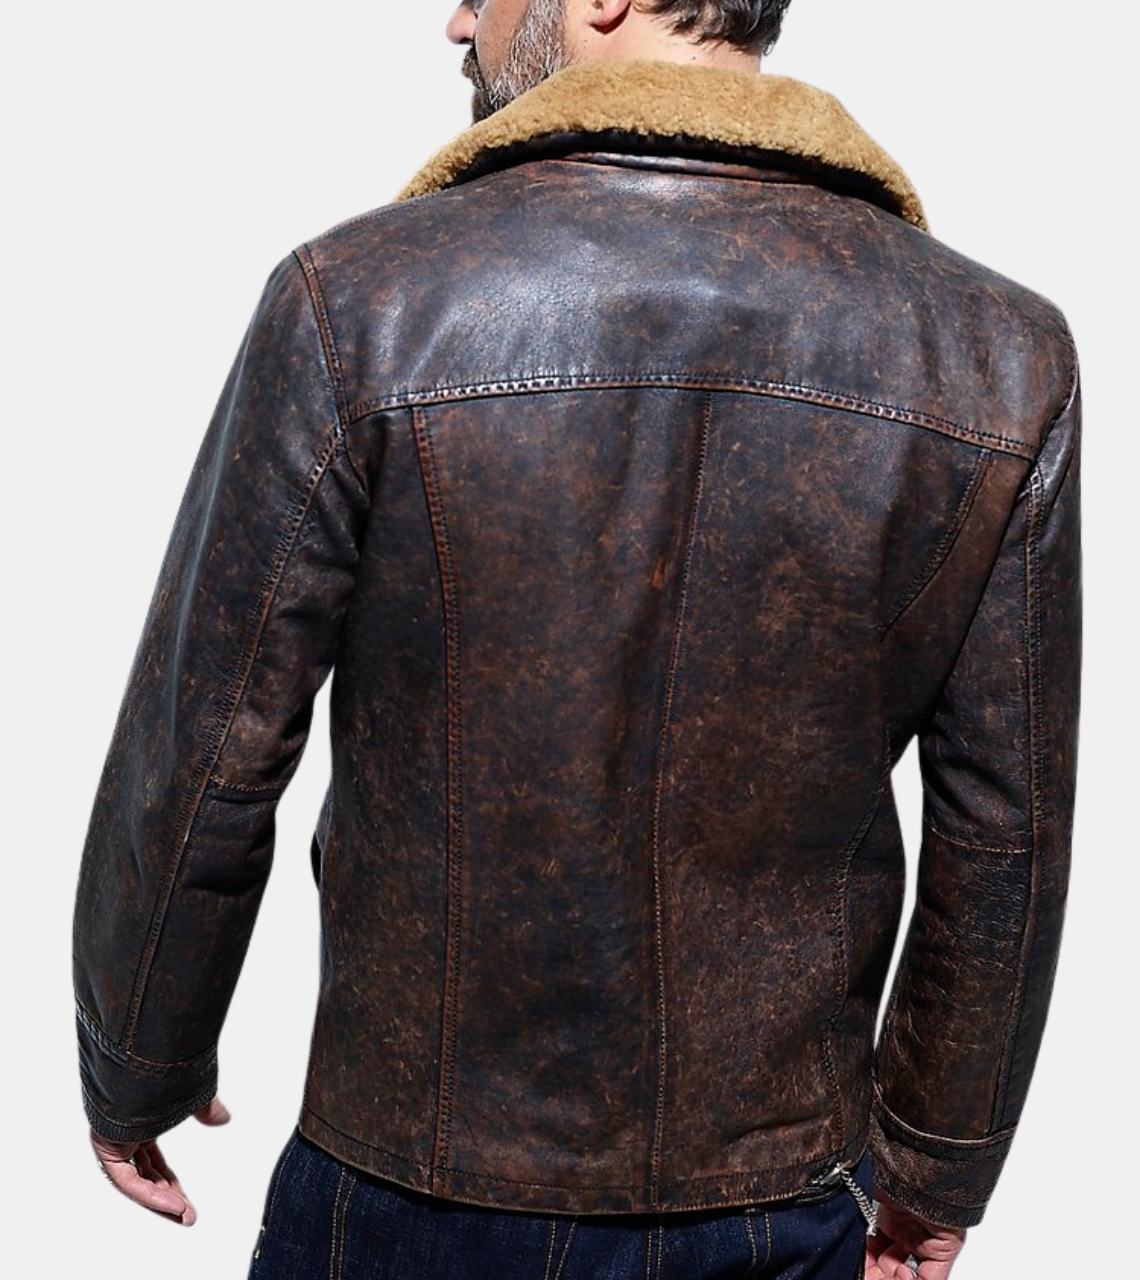  Willown Men's Brown Shearling Distressed Leather Jacket Back